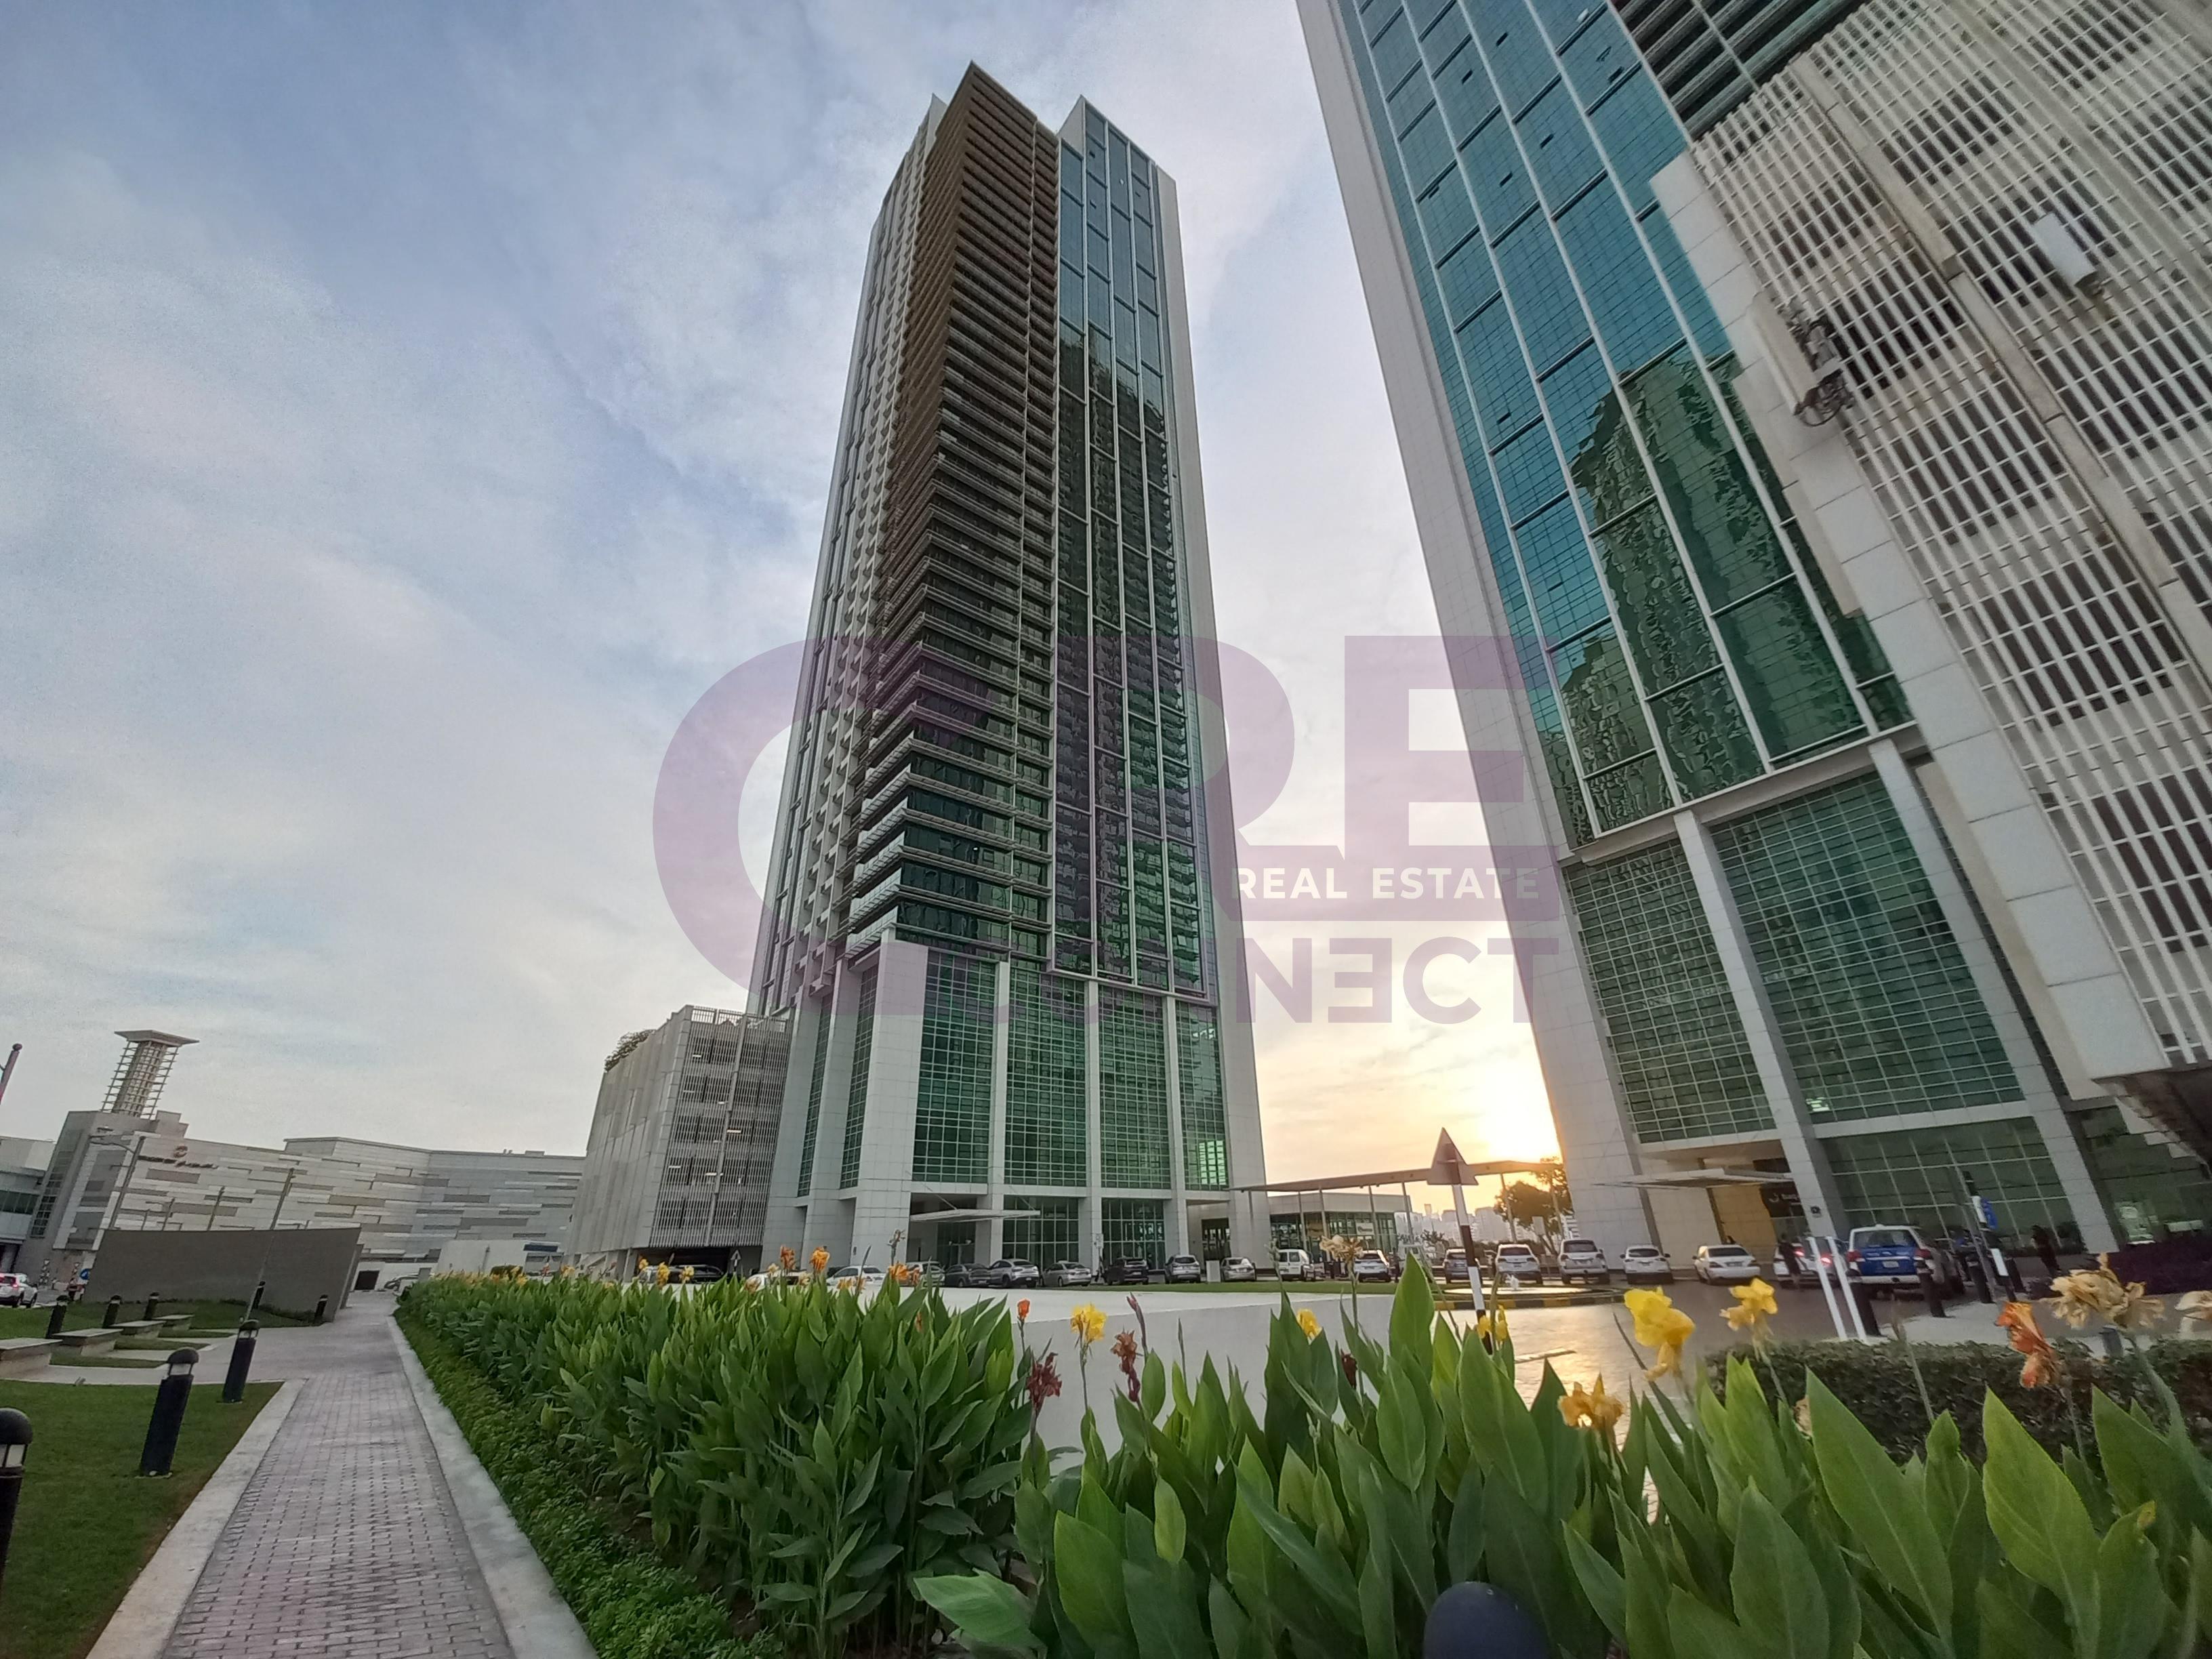 1 bed, 2 bath Apartment for rent in Tala Tower, Marina Square, Al Reem Island, Abu Dhabi for price AED 80000 yearly 